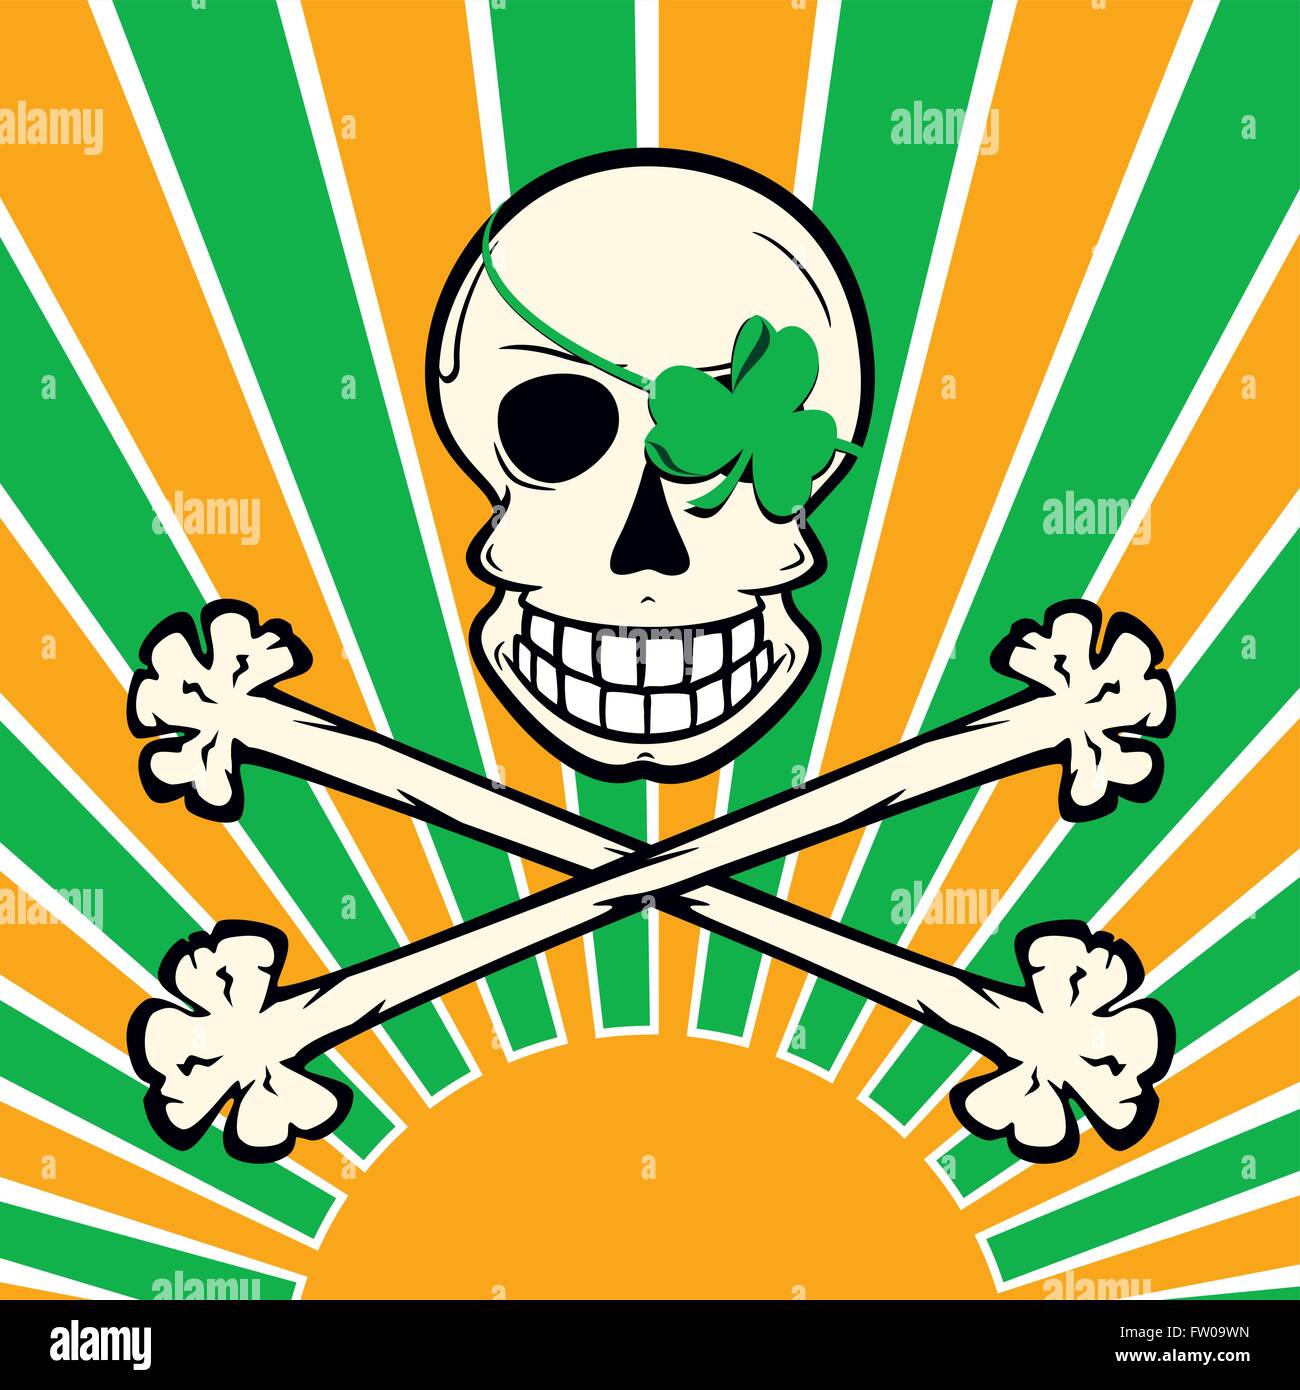 Jolly Roger a la Irish with shamrock eyepatch and sunset / sunrise in green white and orange with skull and crossbones. Stock Vector